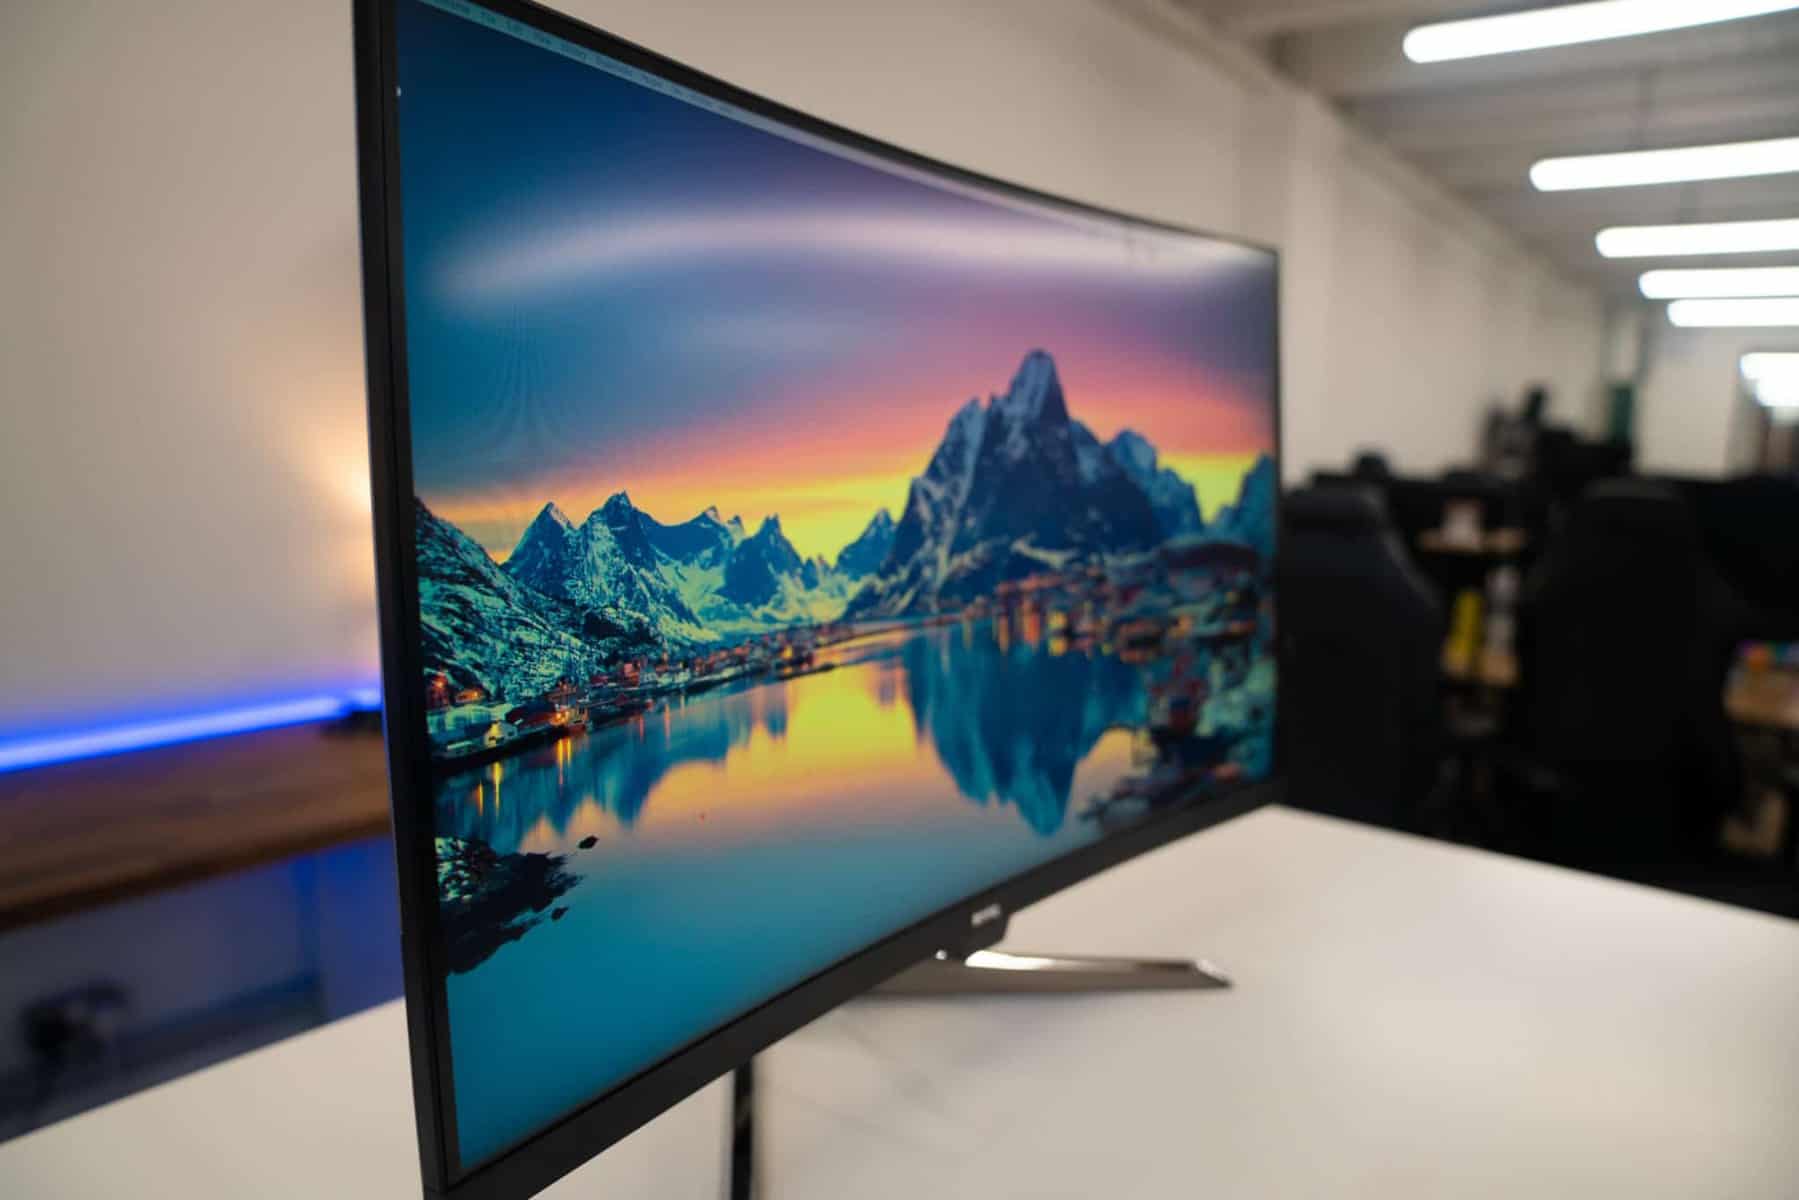 How To Test Your Monitor For Backlight Bleed – Backlight Bleed Test